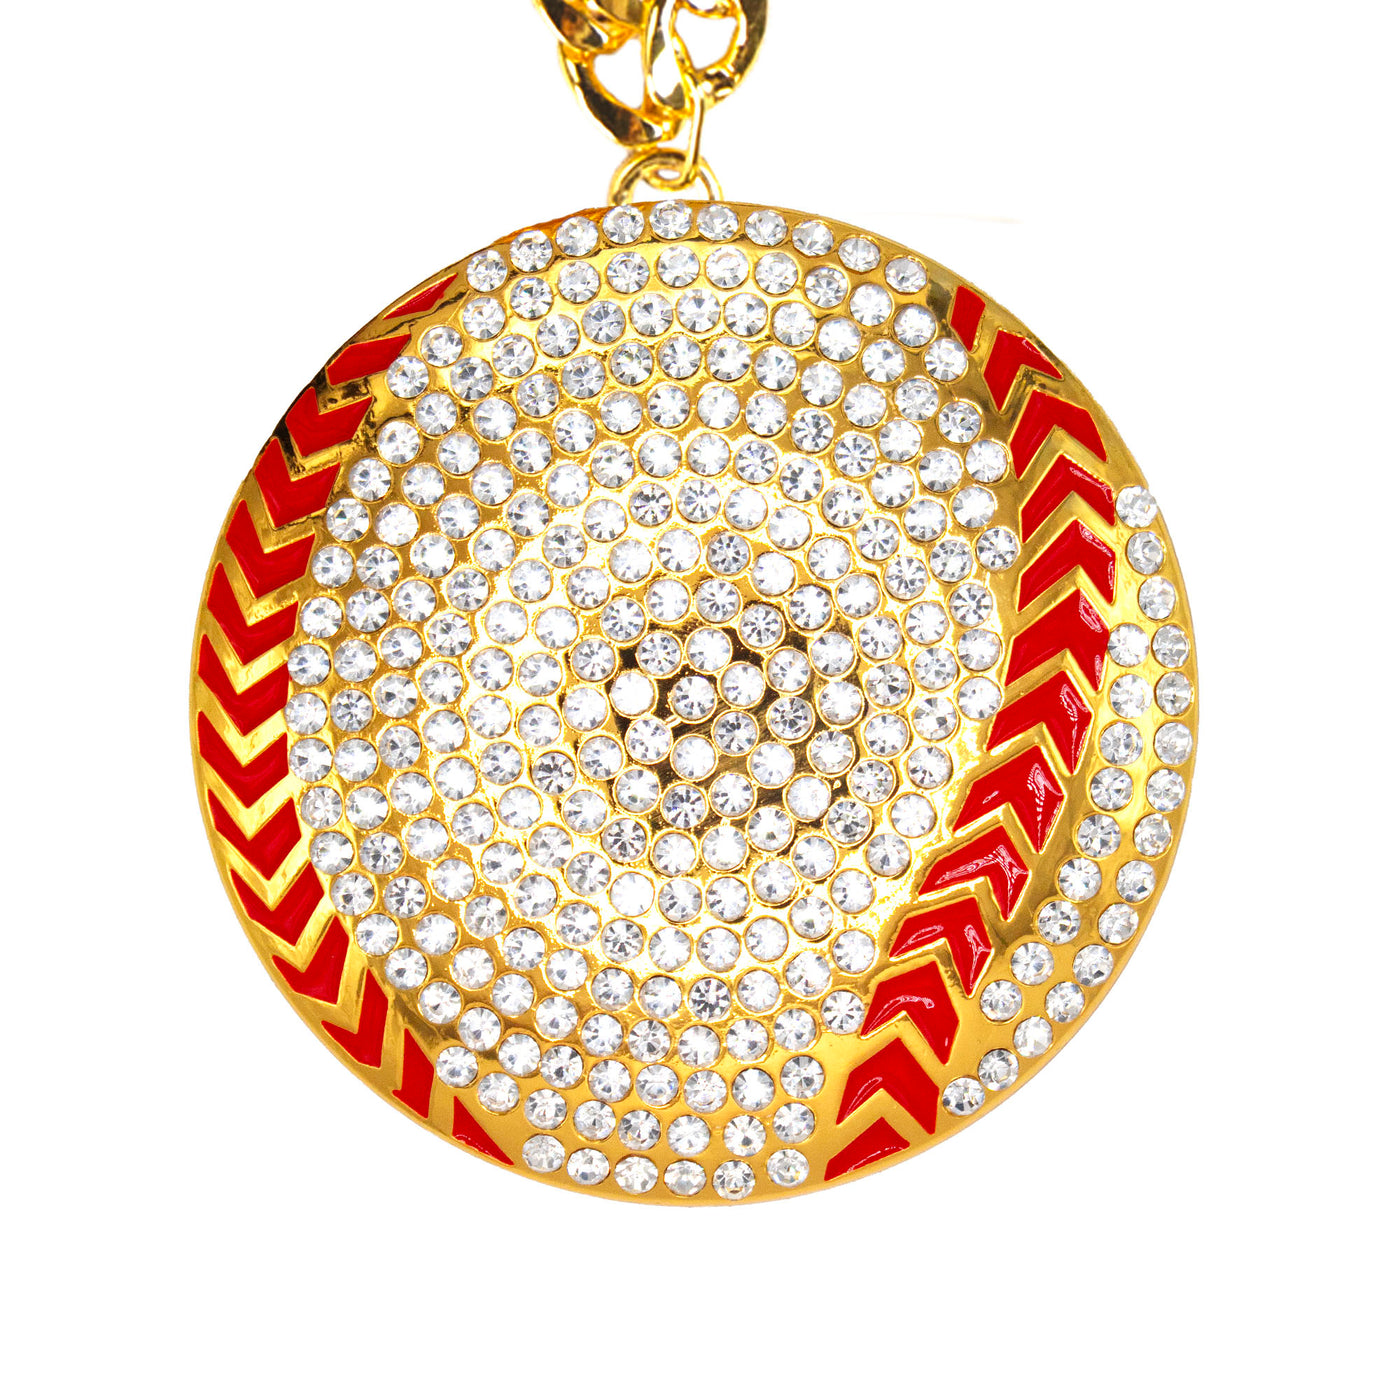 BALL STONE CHAIN GOLD/CLEAR/RED